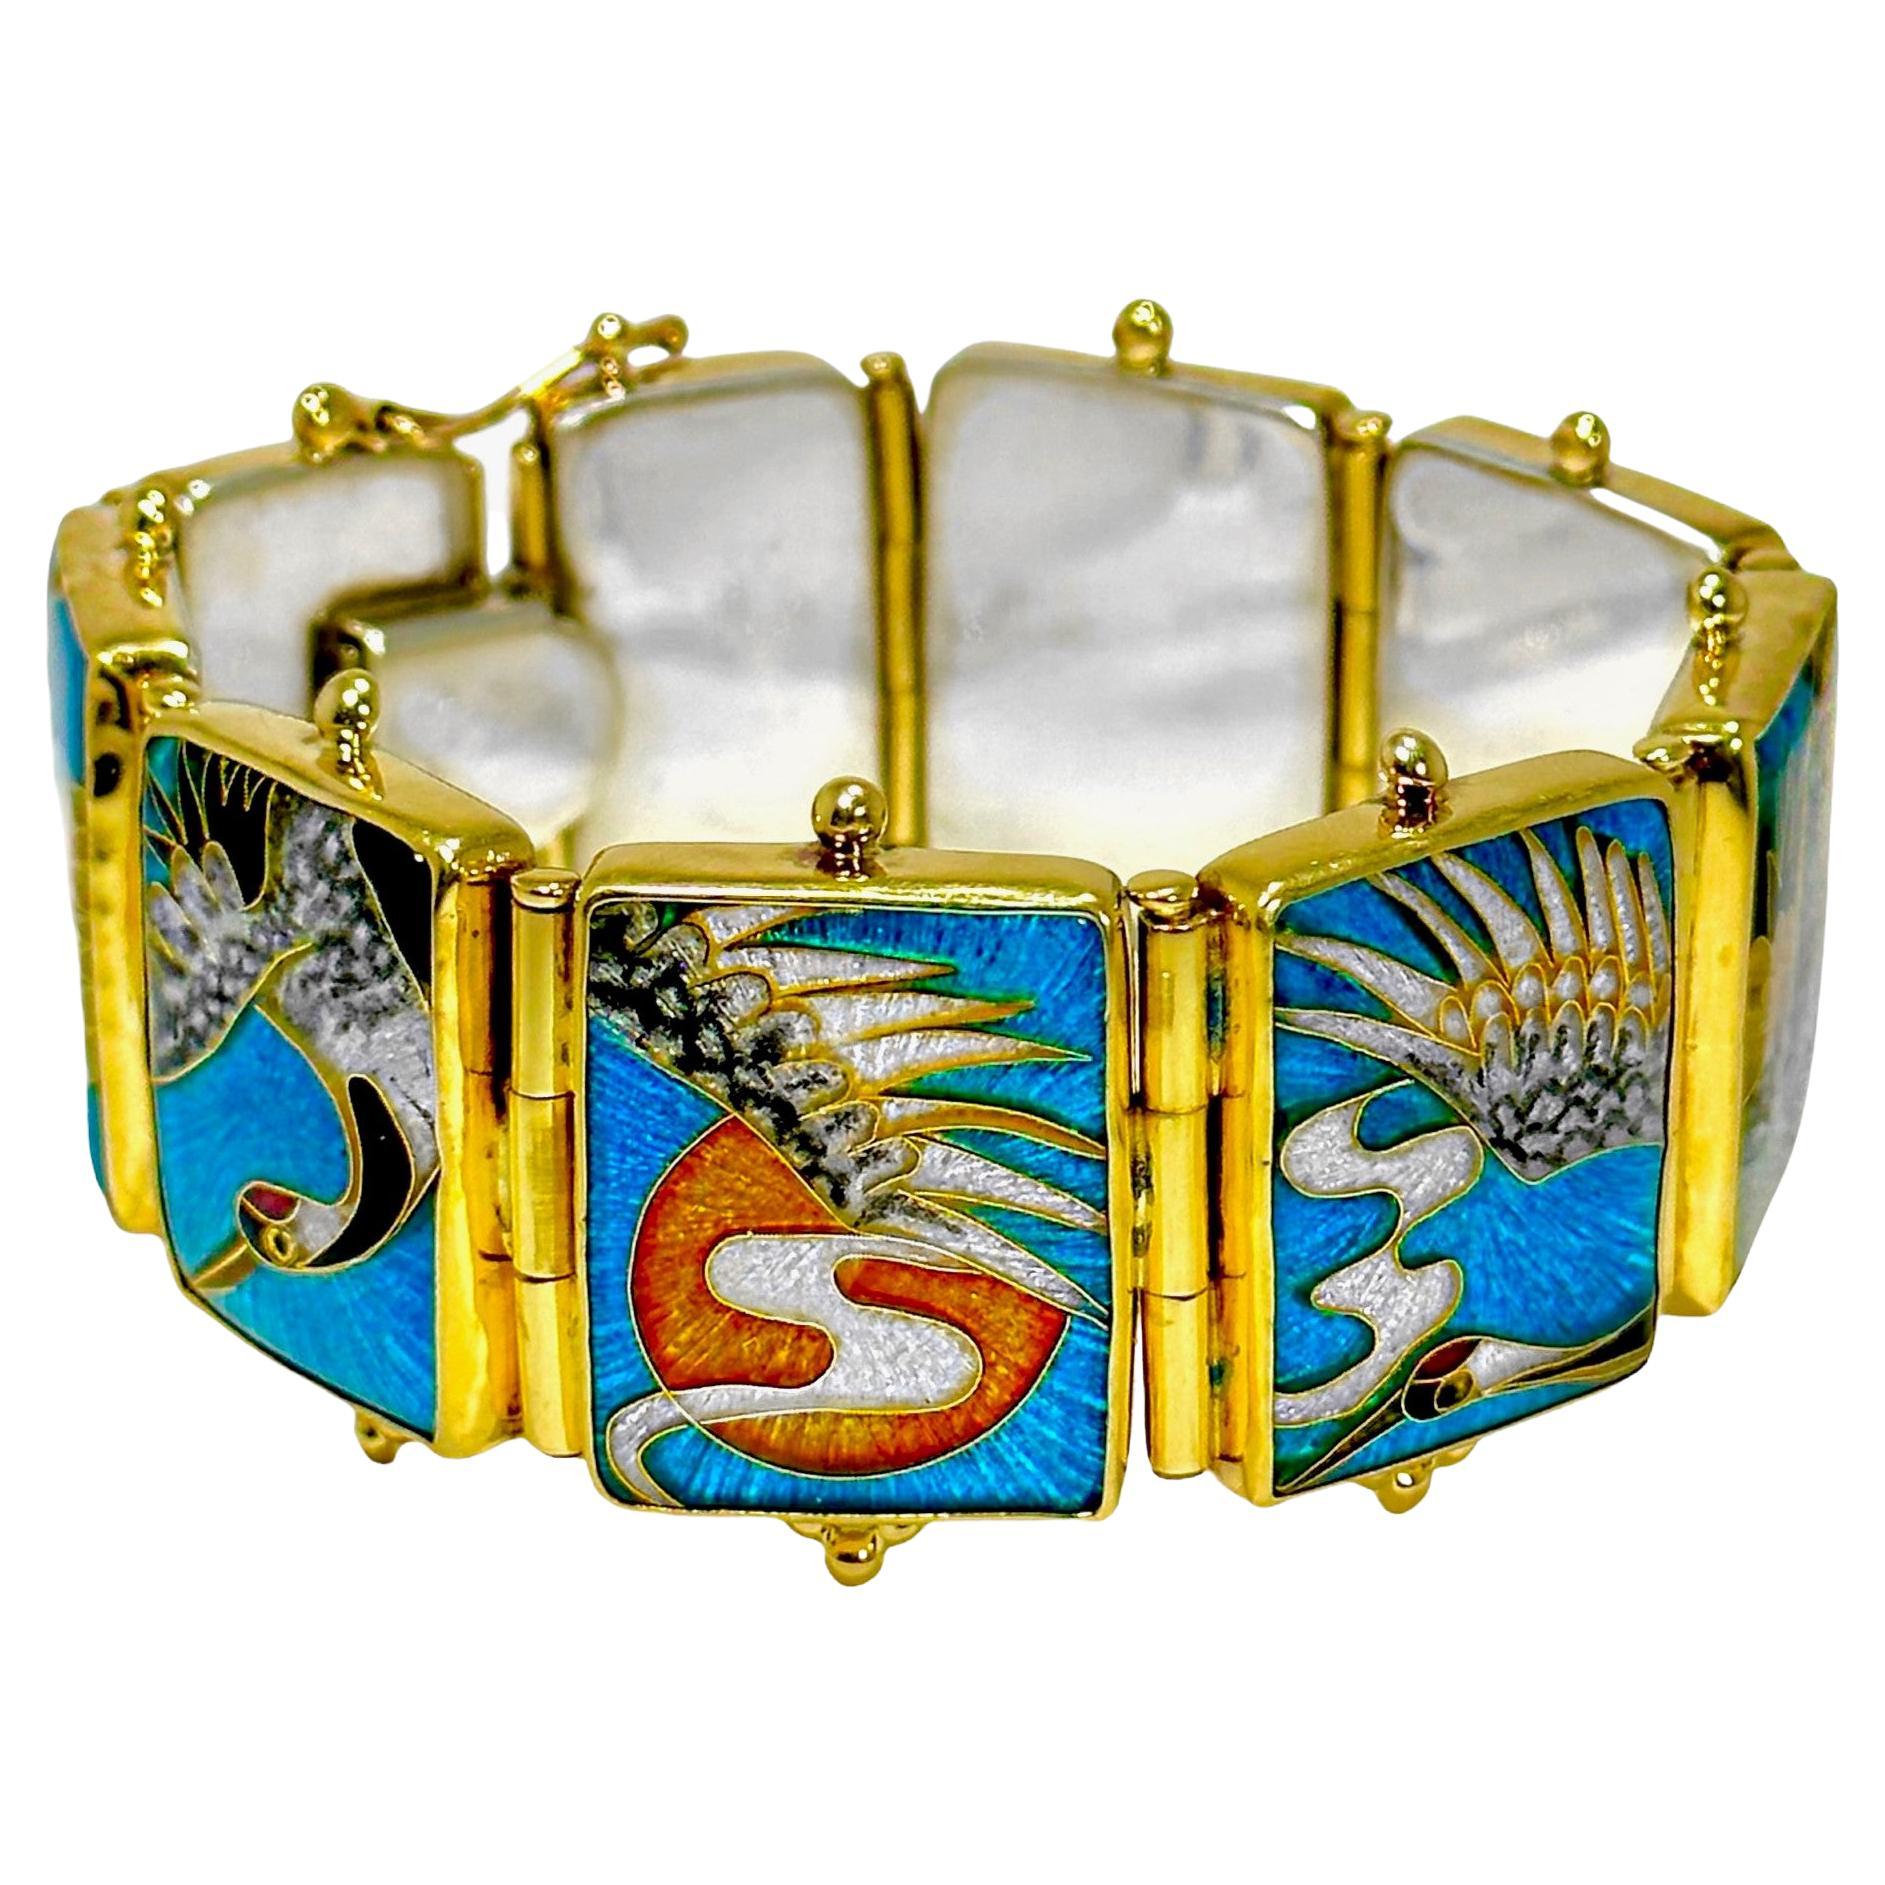 Exquisite Avian Fantasy in Gold, Silver and Cloisonne Enamel, by Tricia Young